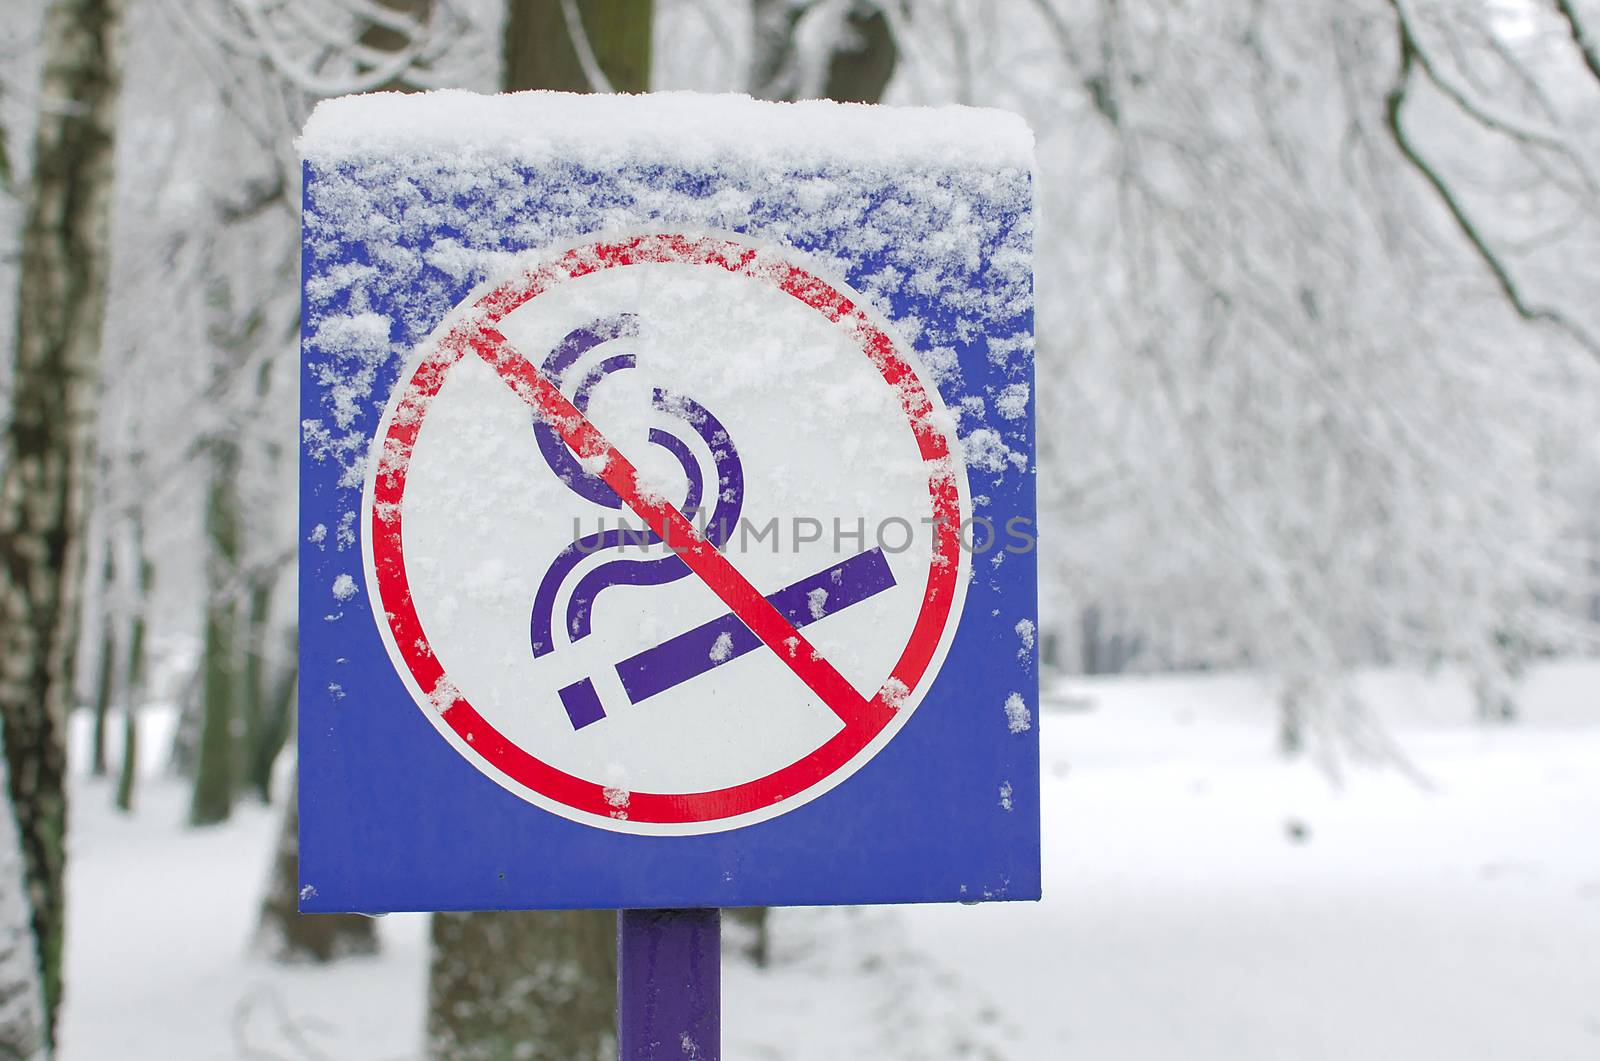 No smoking metal sign pole in the winter park. Don't smoke sign. by KajaNi